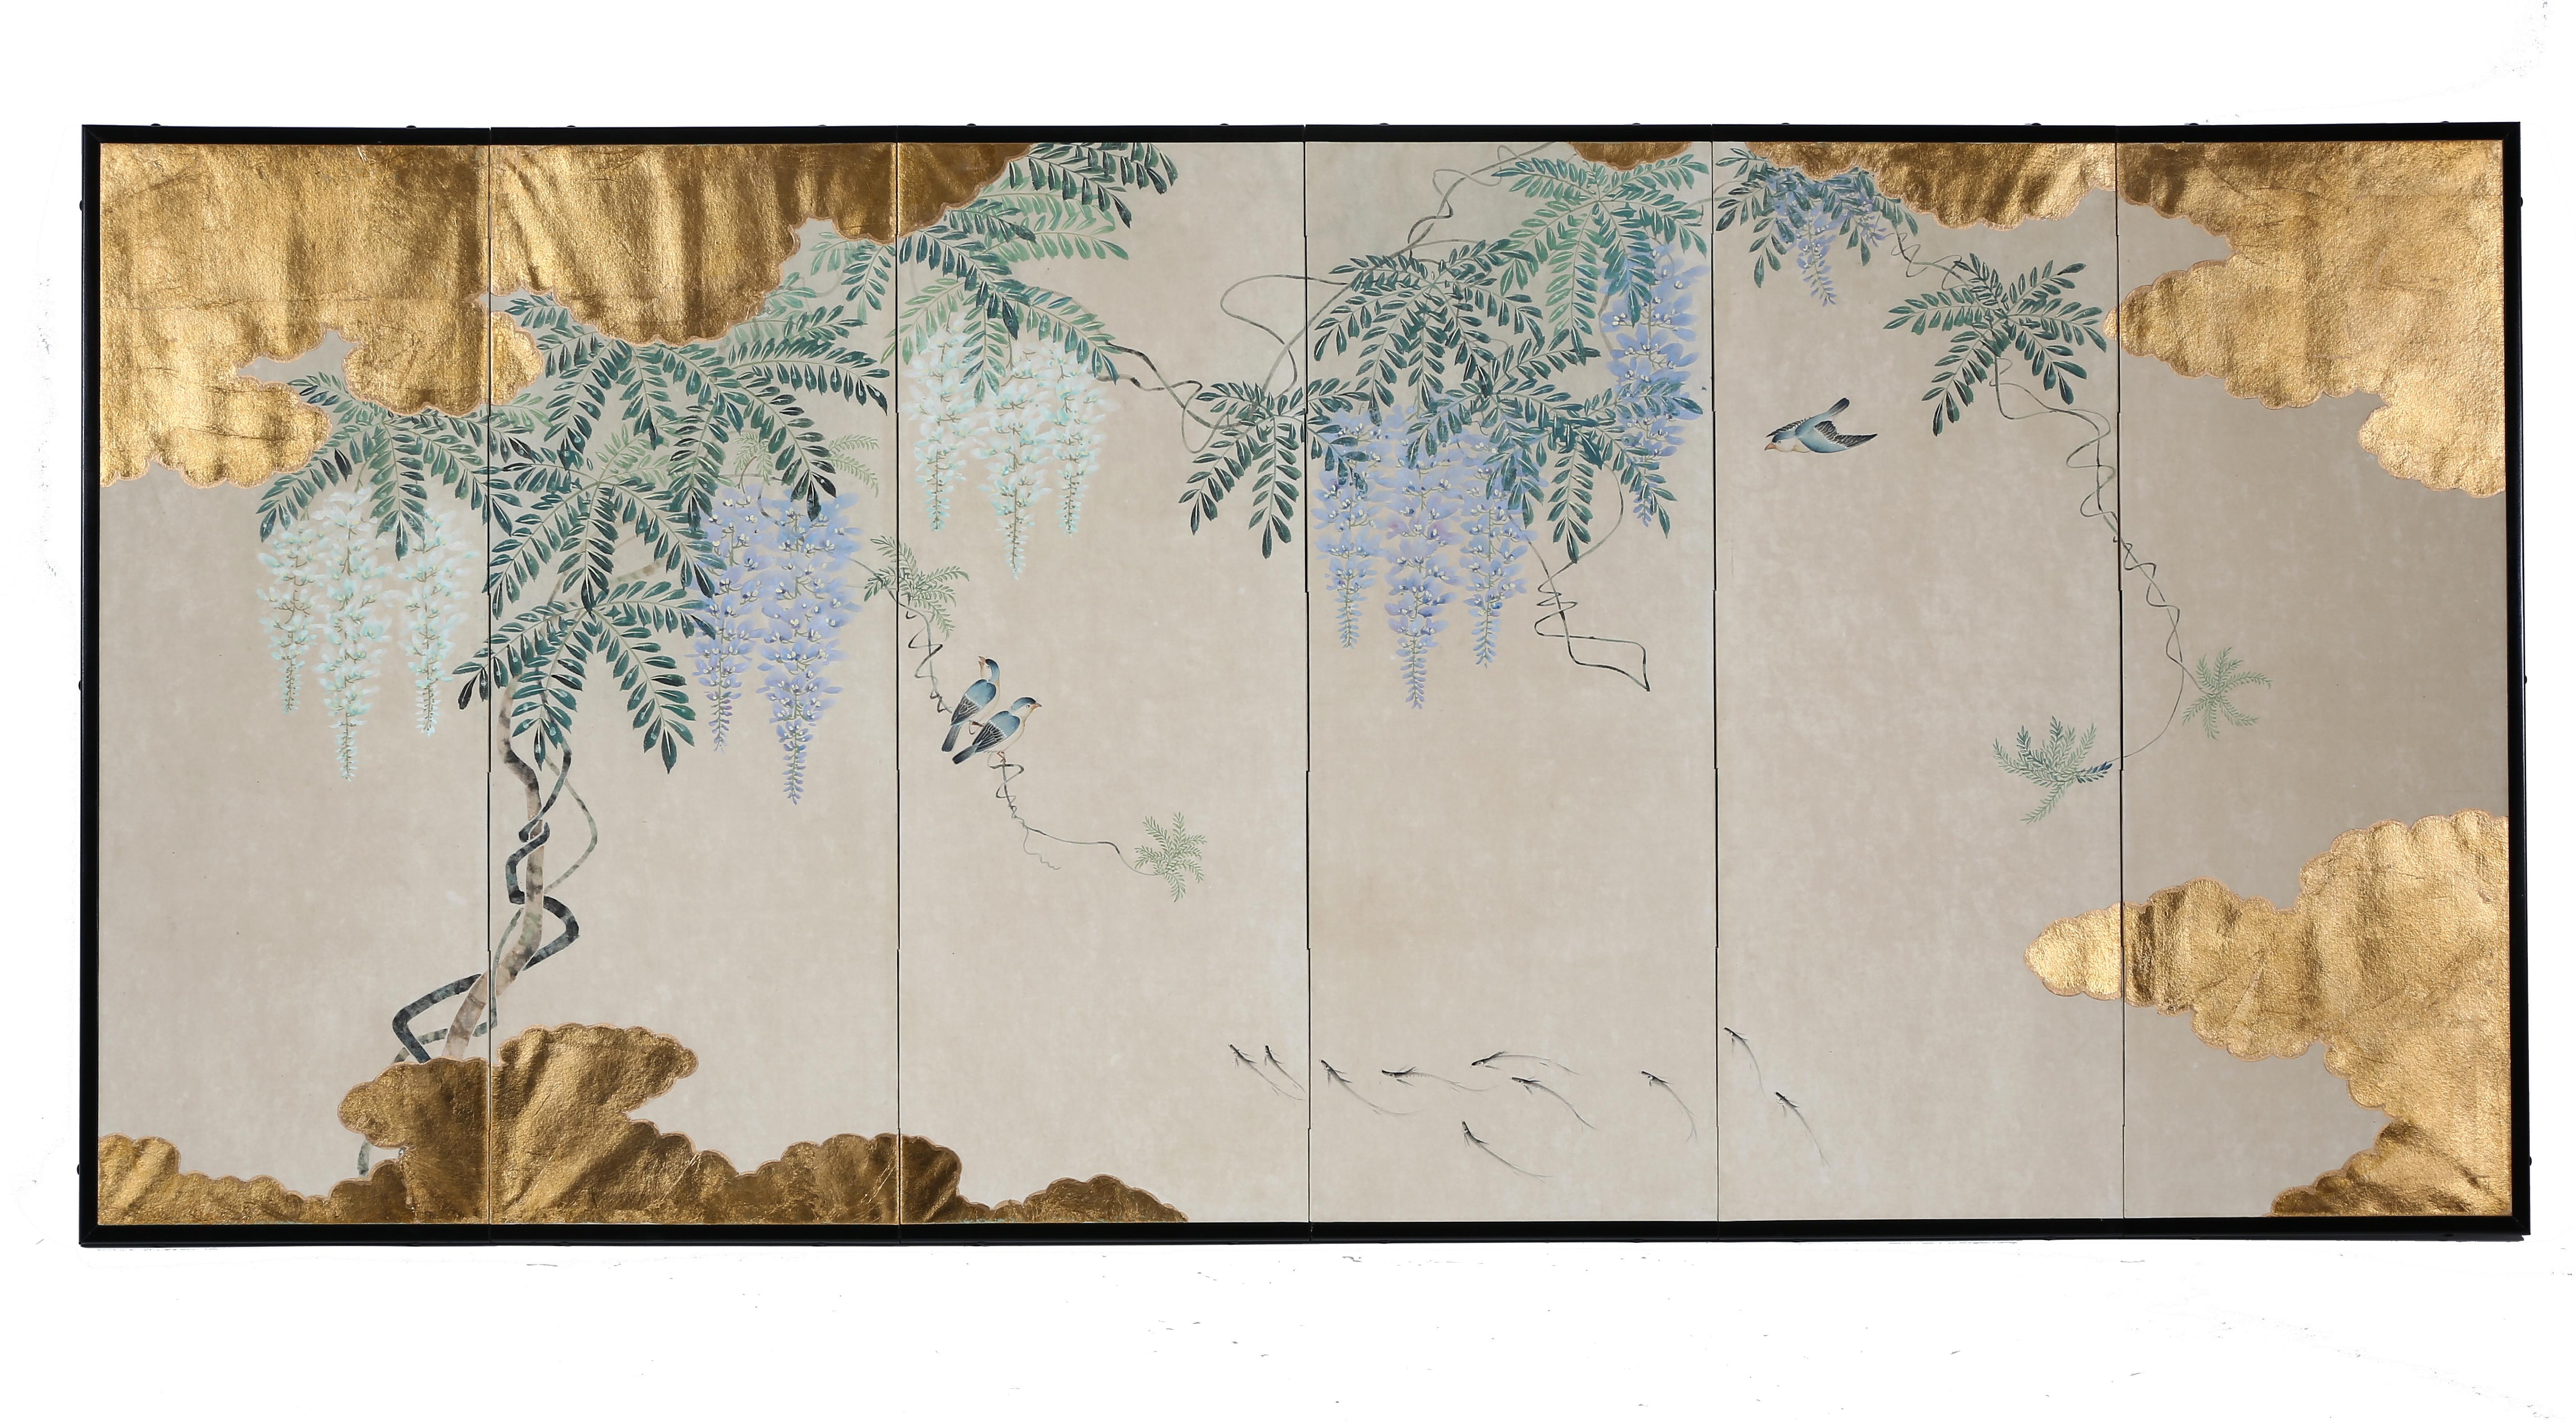 Wood Hand Painted Japanese Folding Screen Byobu of Wisteria by the Pond